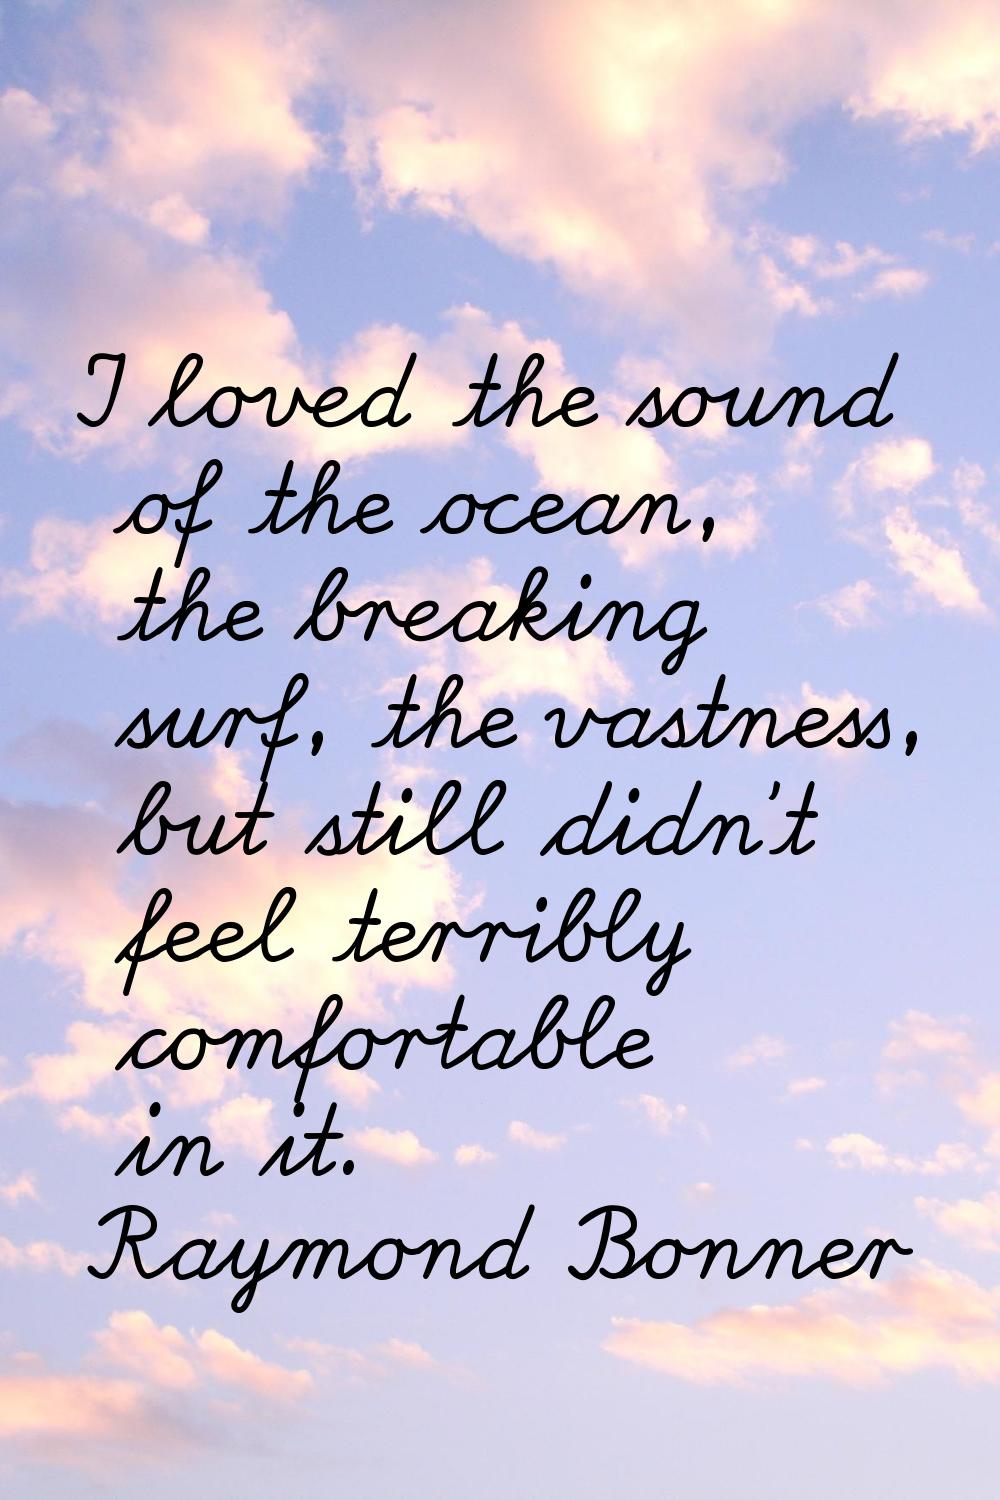 I loved the sound of the ocean, the breaking surf, the vastness, but still didn't feel terribly com